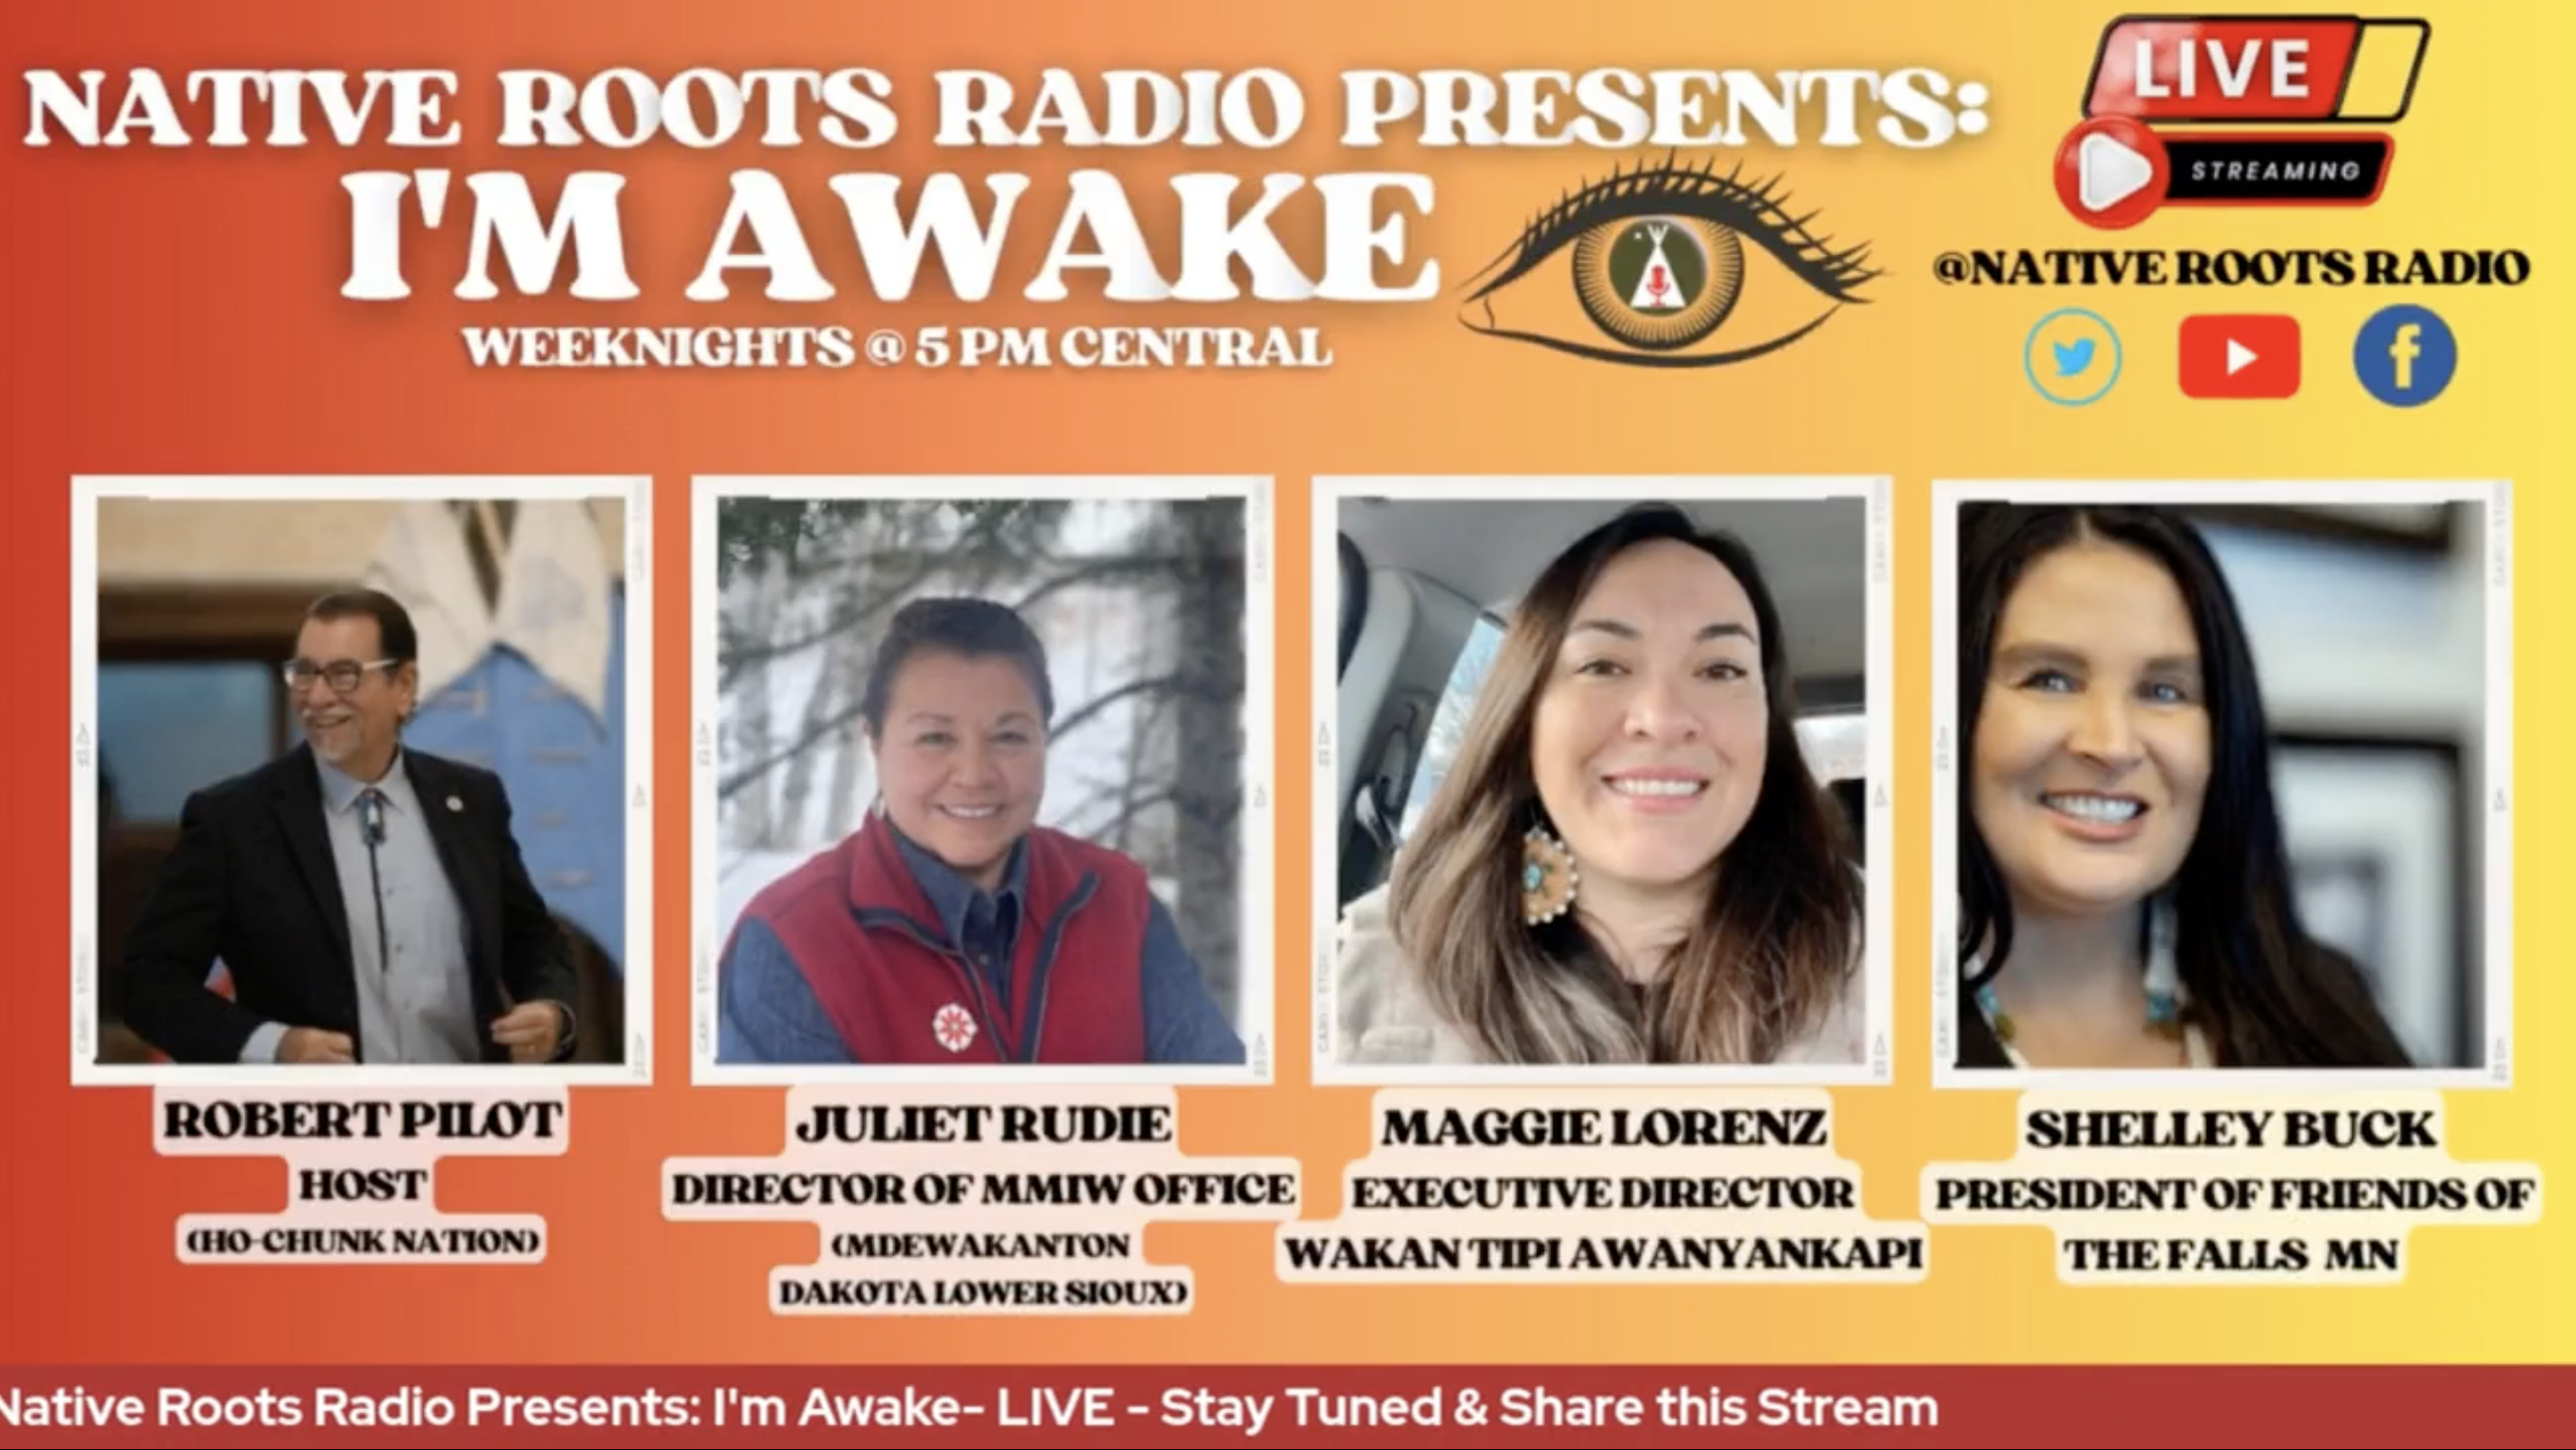 Shelley Buck and Maggie Lorenz on Native Roots Radio